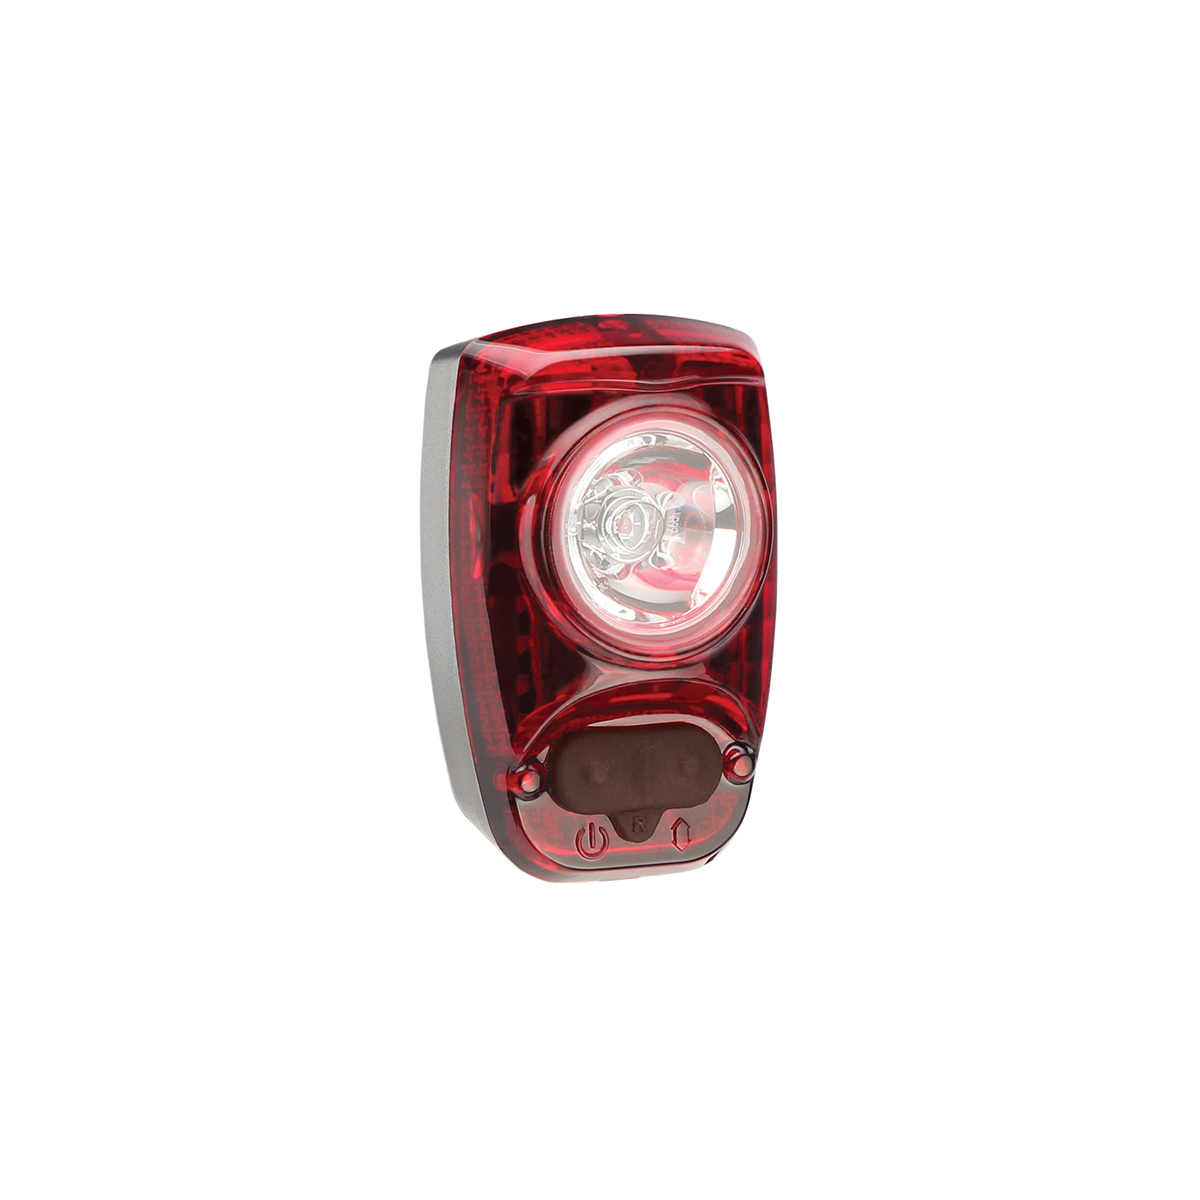 Cygolite Hotshot SL 50 Rechargeable Taillight - image 2 of 3